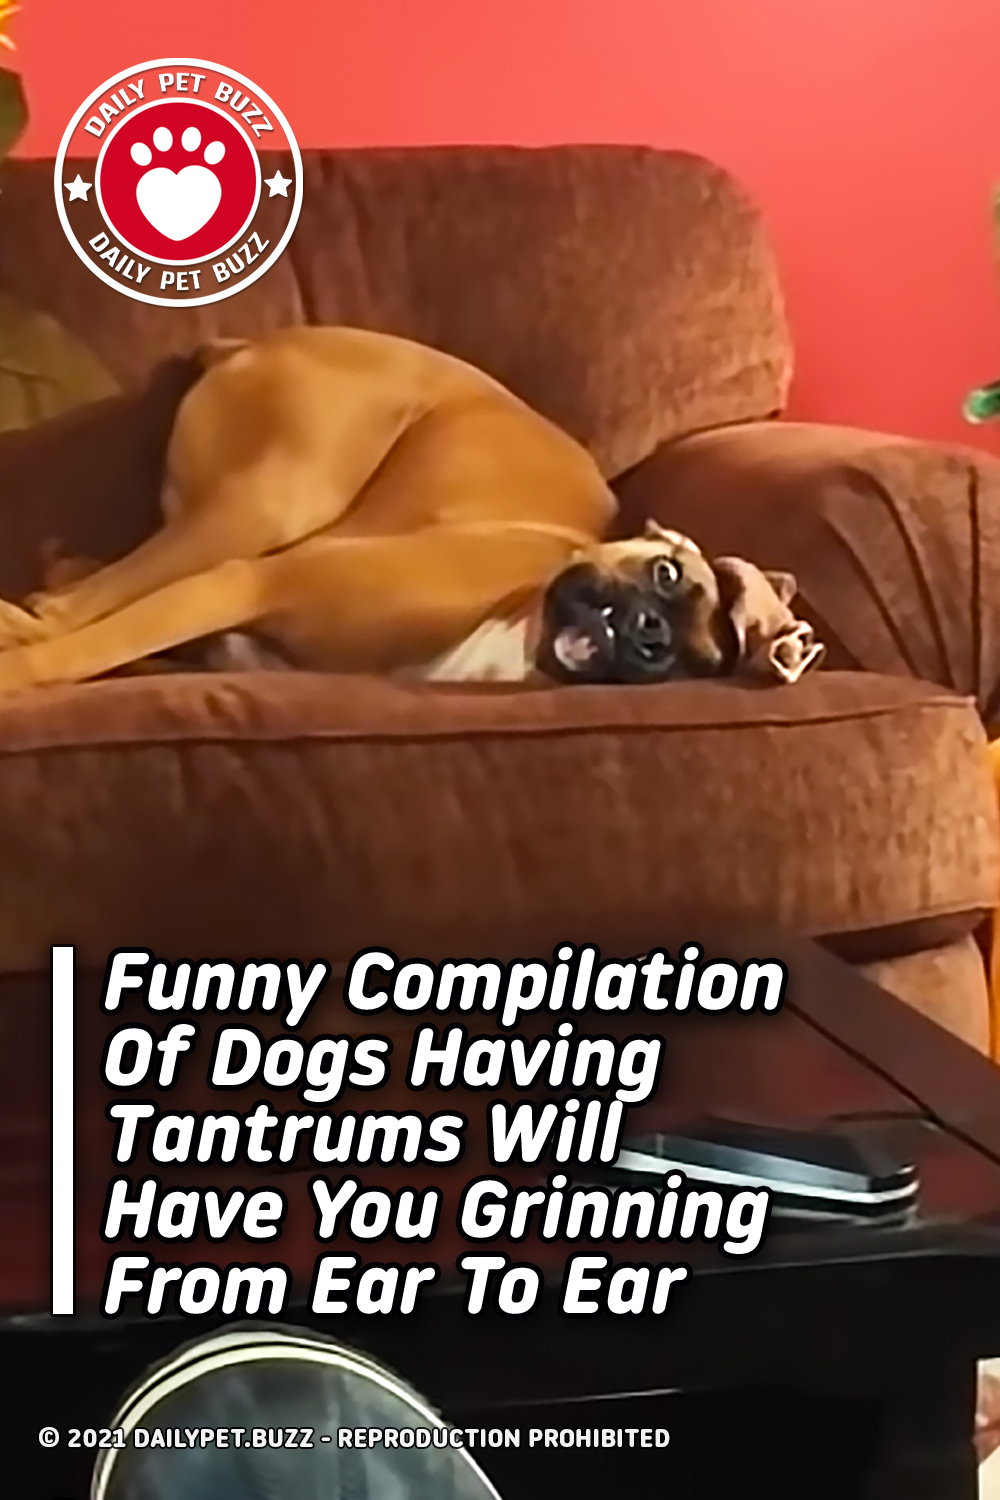 Funny Compilation Of Dogs Having Tantrums Will Have You Grinning From Ear To Ear